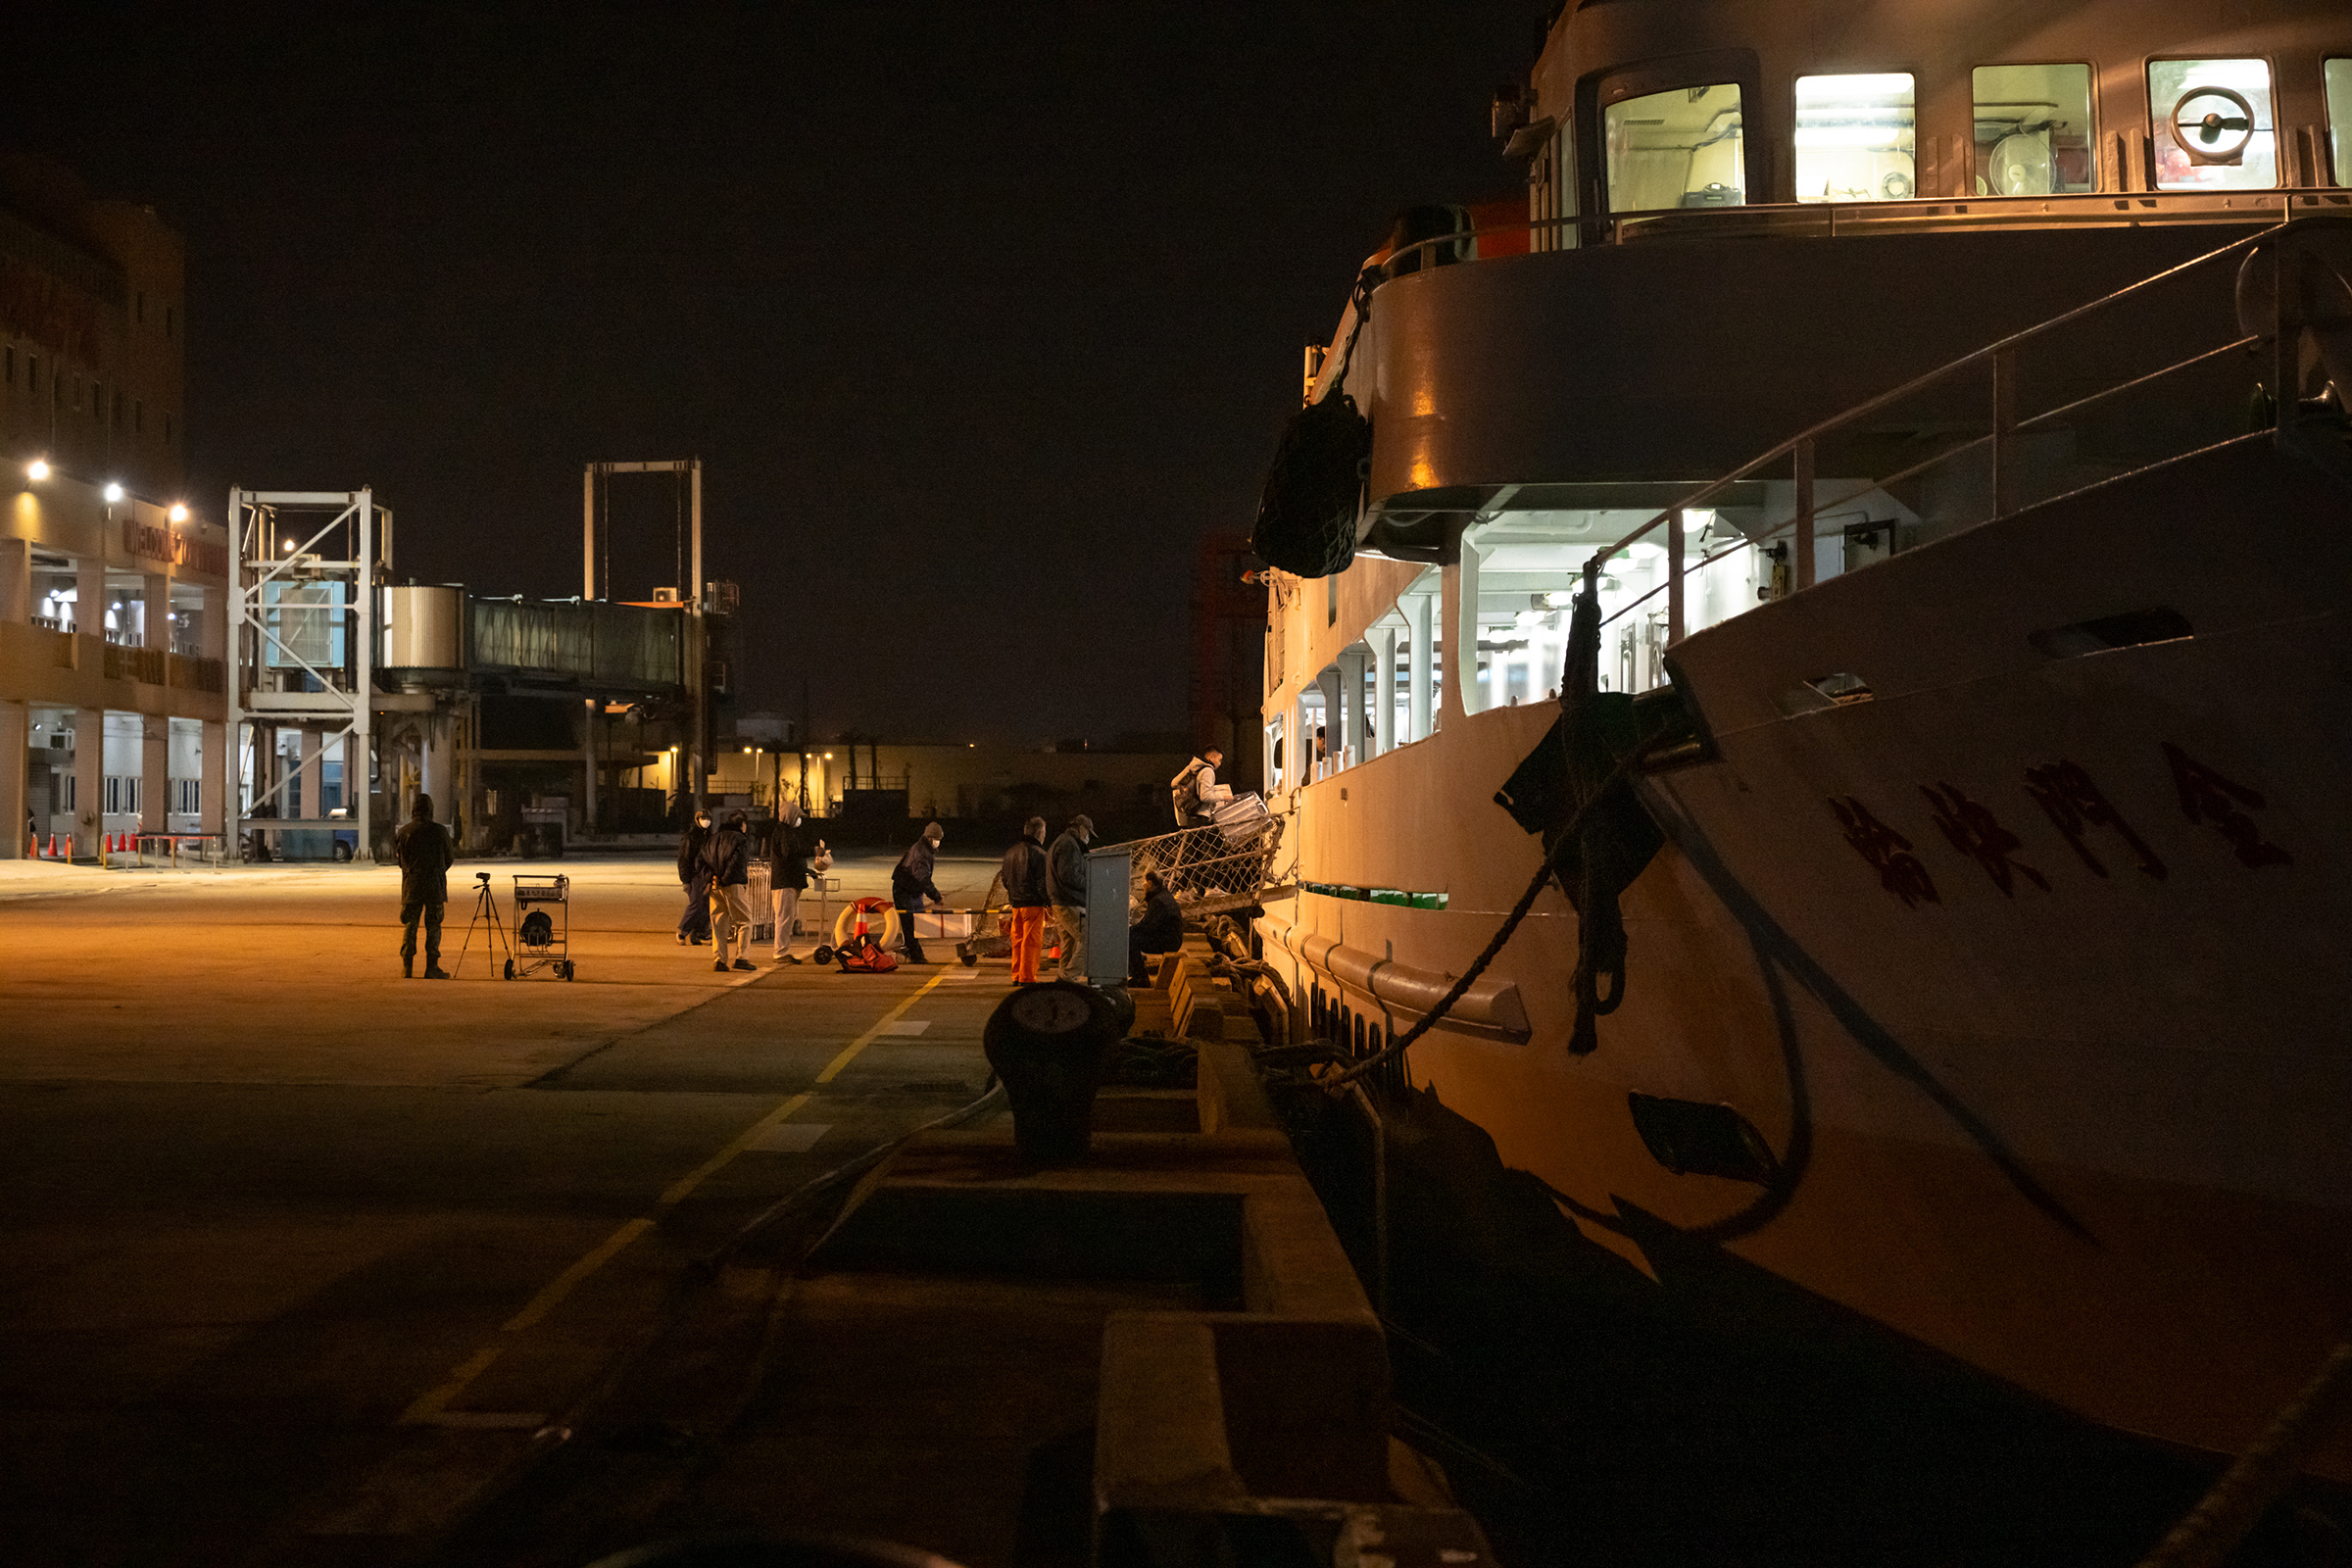 Wuqiu residents board on a 6 hour overnight ferry back to Wuqiu to vote. Only Wuqiu residents are permitted to access the military Islands. Jan 12, 2024.